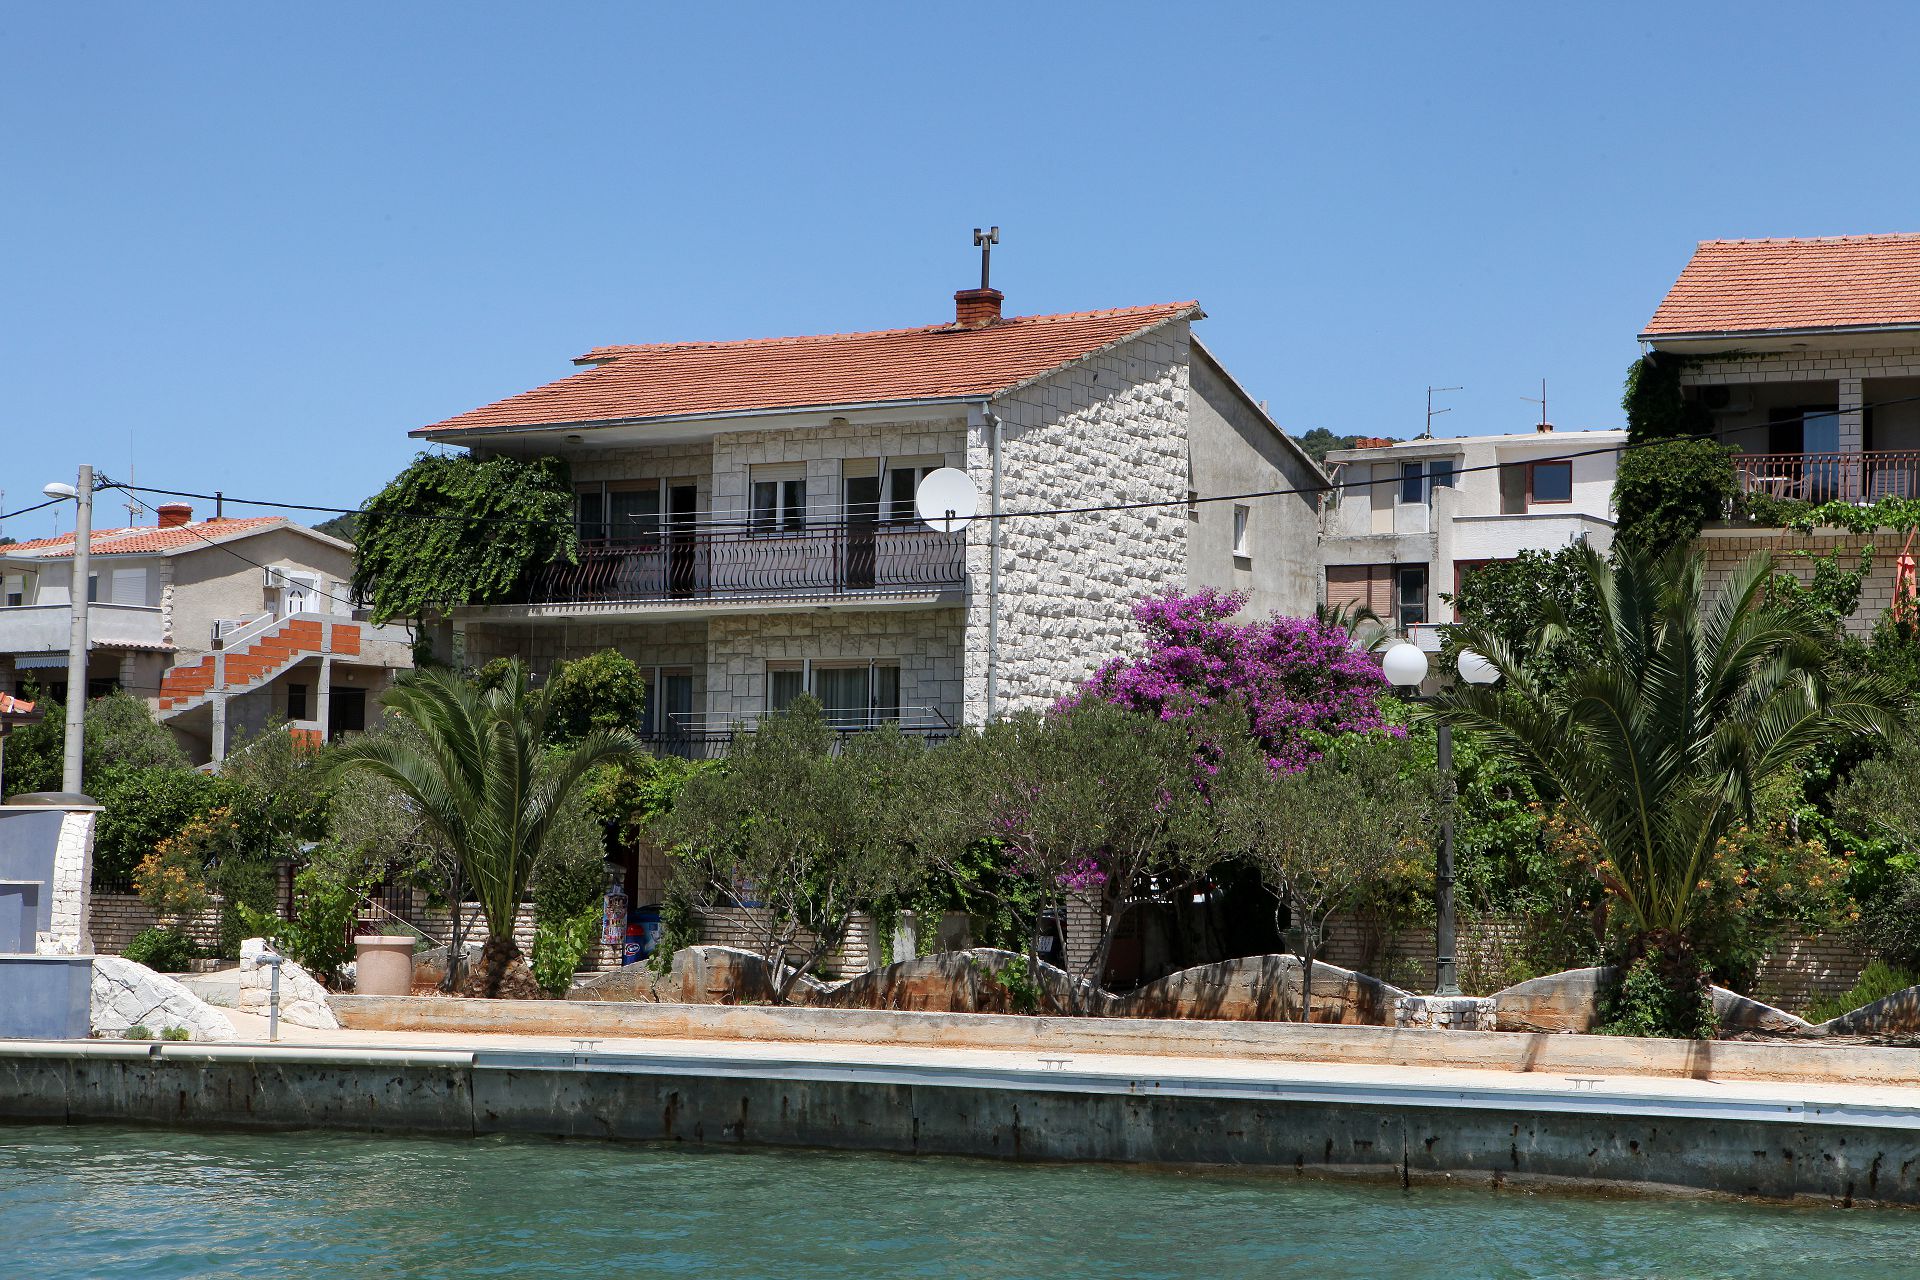 Apartments Mar - 10m from the sea: A1(5+1), A2(6) Vinisce - Riviera Trogir 